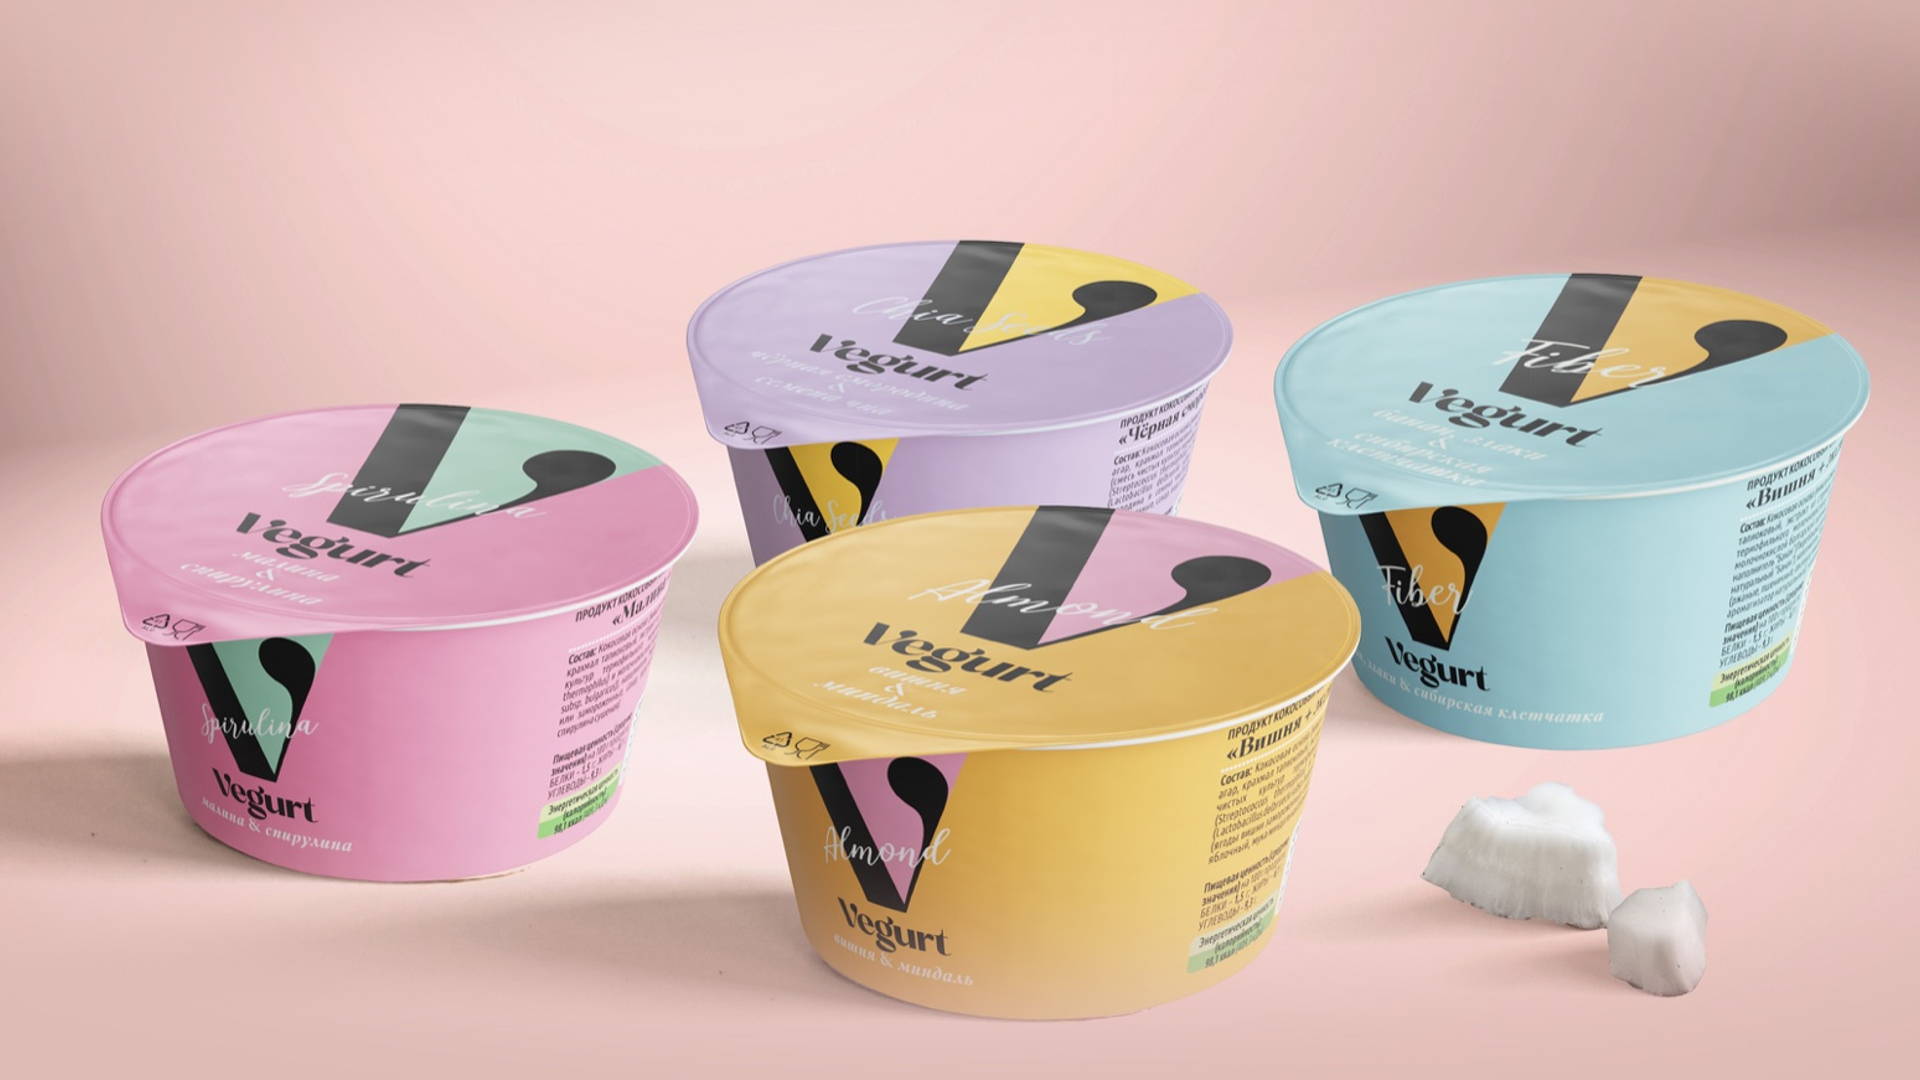 Featured image for Vegurt Is A Vegan Yogurt That's Making A Vibrant Statement